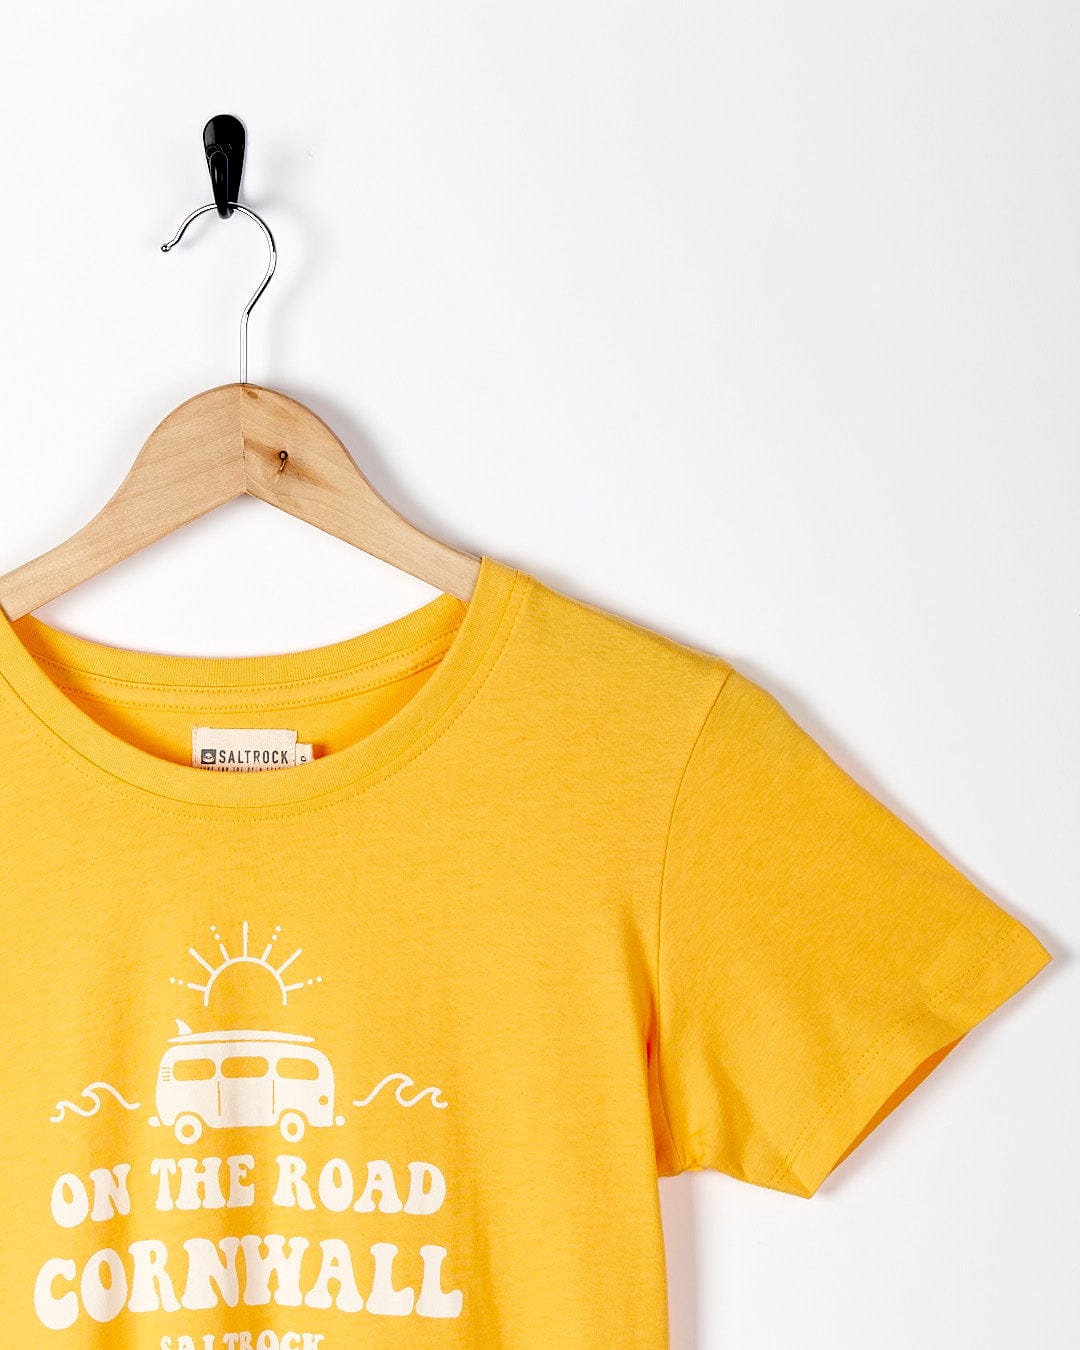 A yellow Saltrock t - shirt that says On The Road Cornwall.